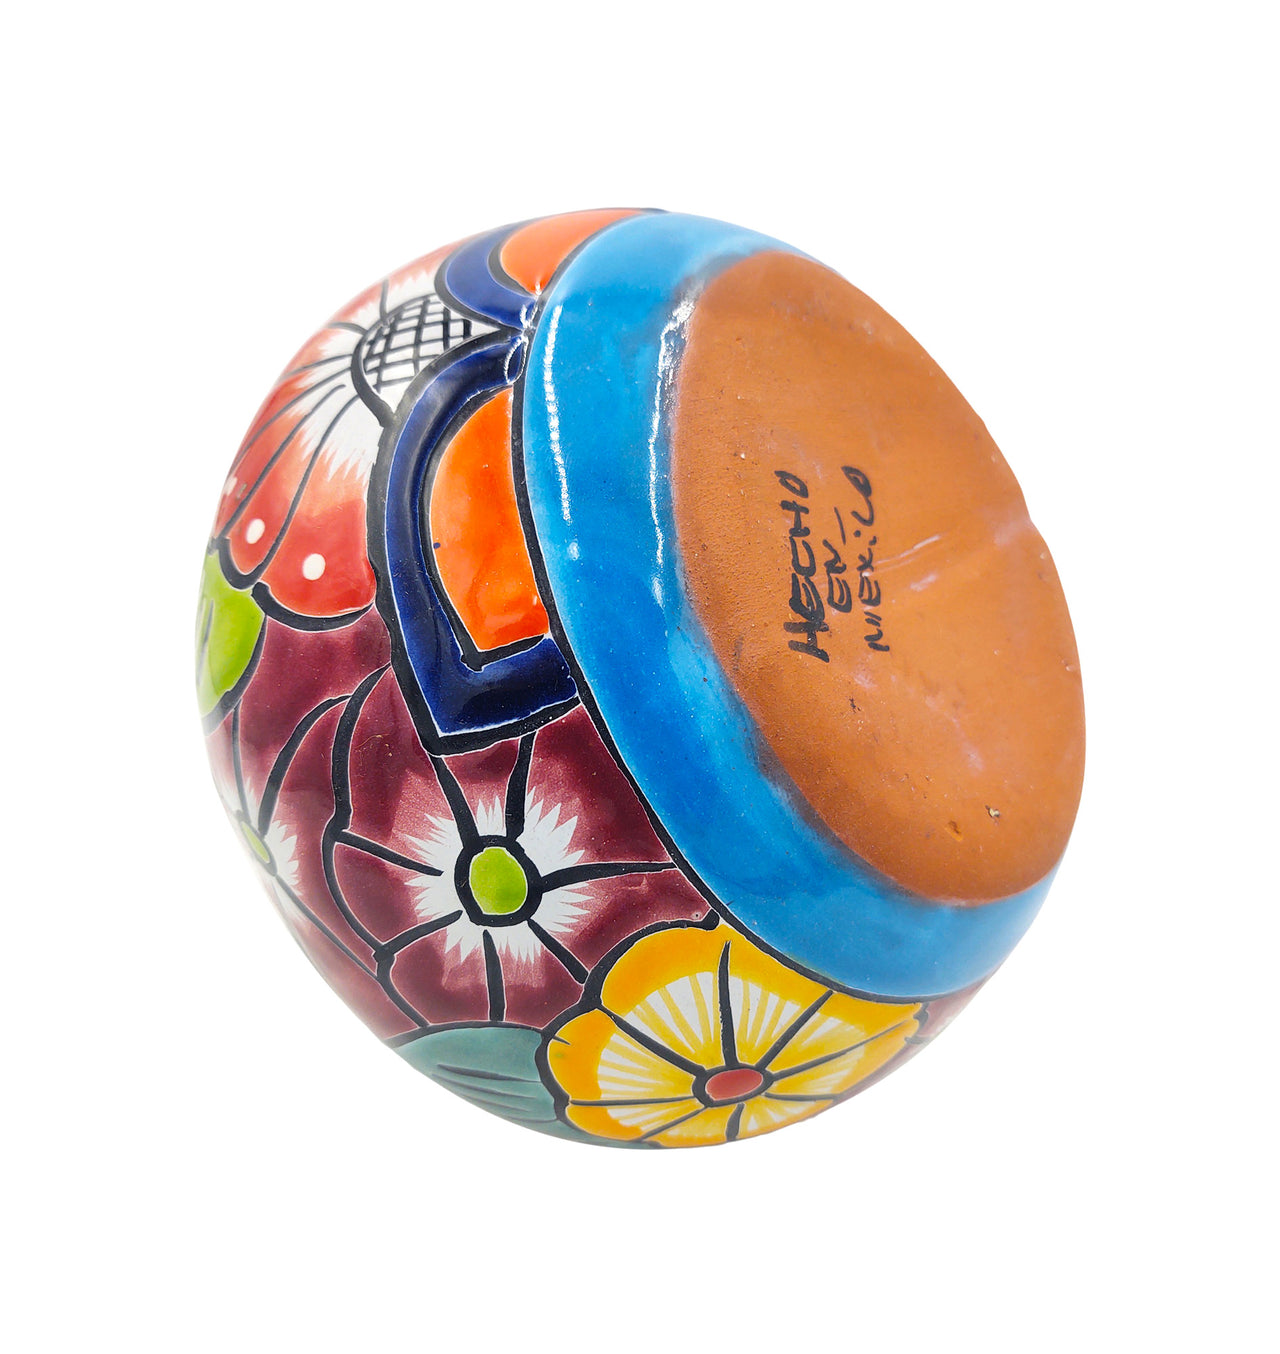 Mexican Talavera Hand Painted Flower Vase - Traditional Mexican Decorative Florero for Home Décor With Light Blue Trim